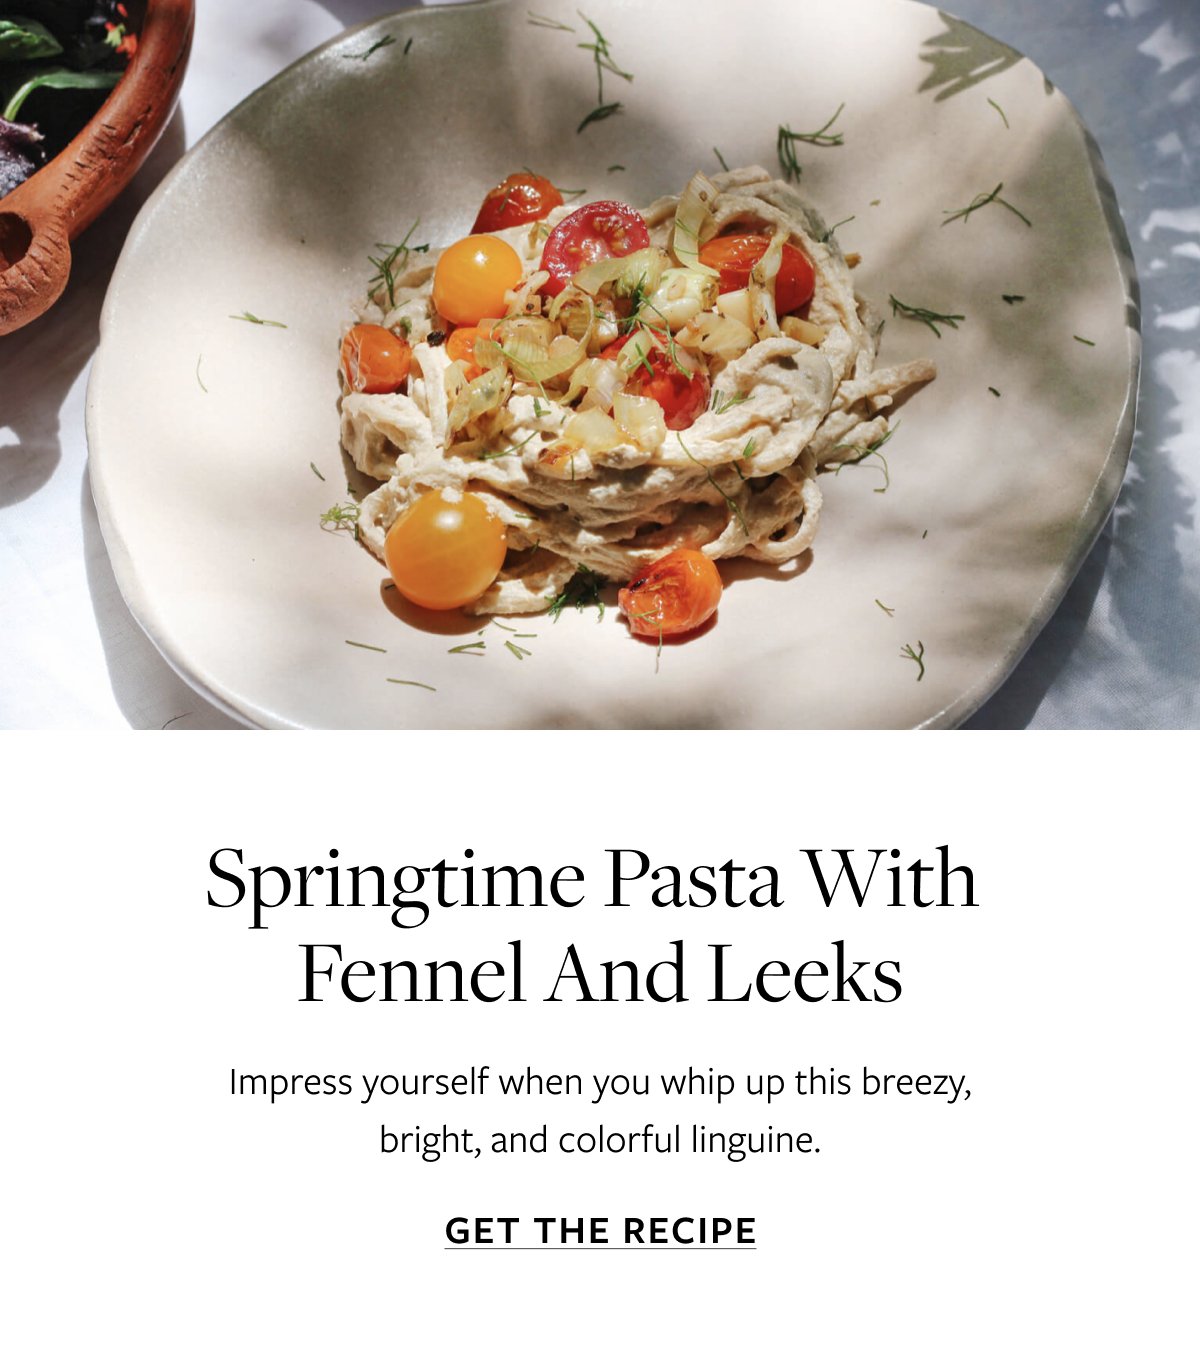 Springtime Pasta with Fennel and Leeks